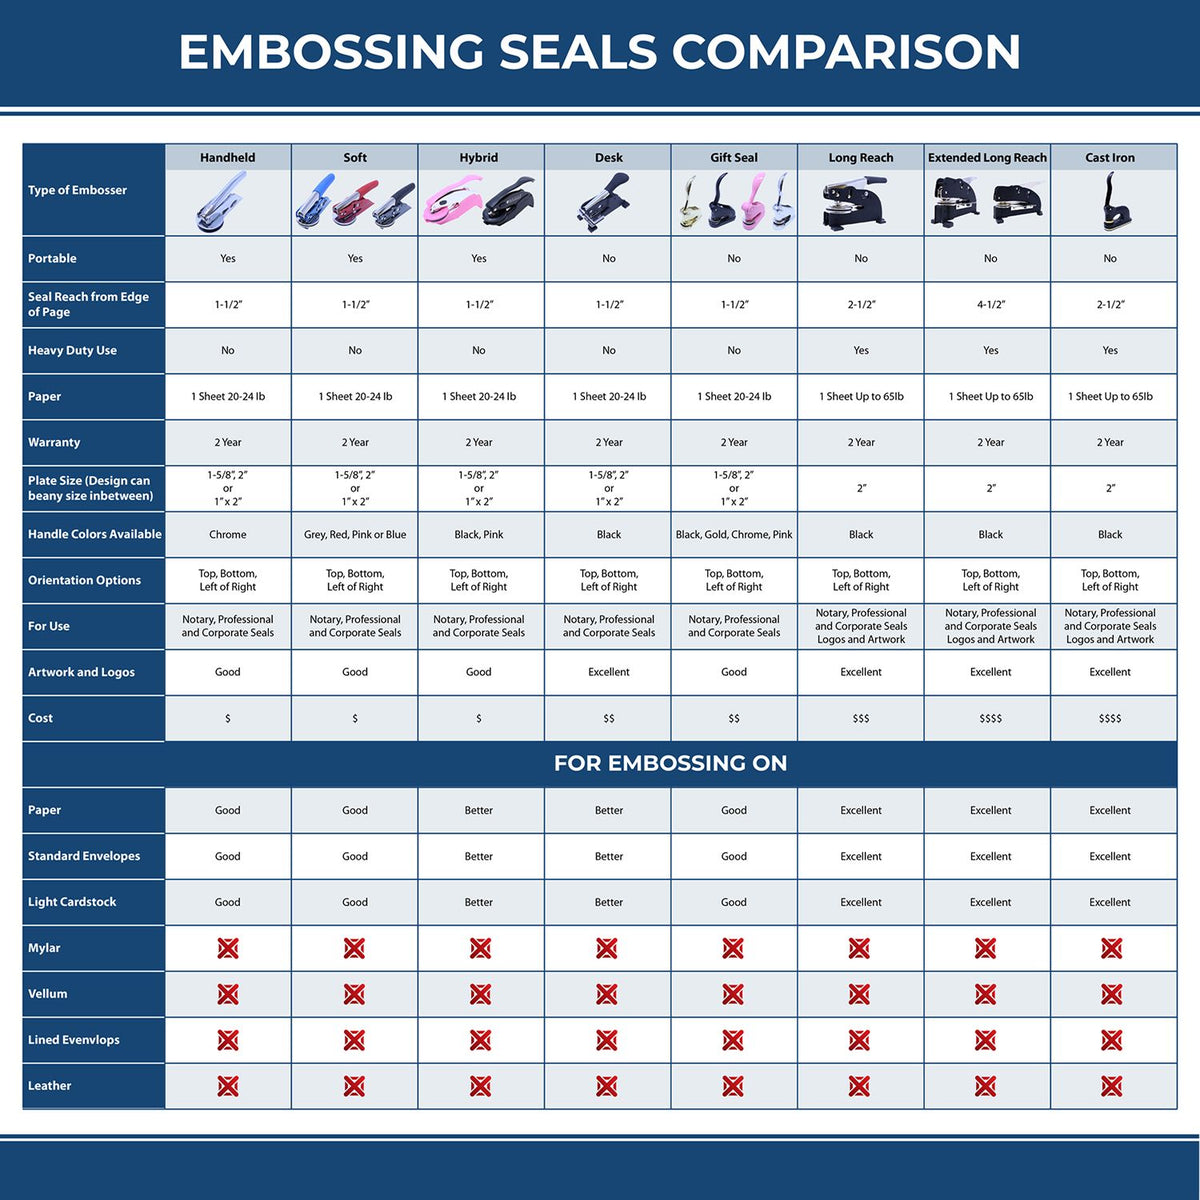 A comparison chart for the different types of mount models available for the Long Reach Indiana Land Surveyor Seal.